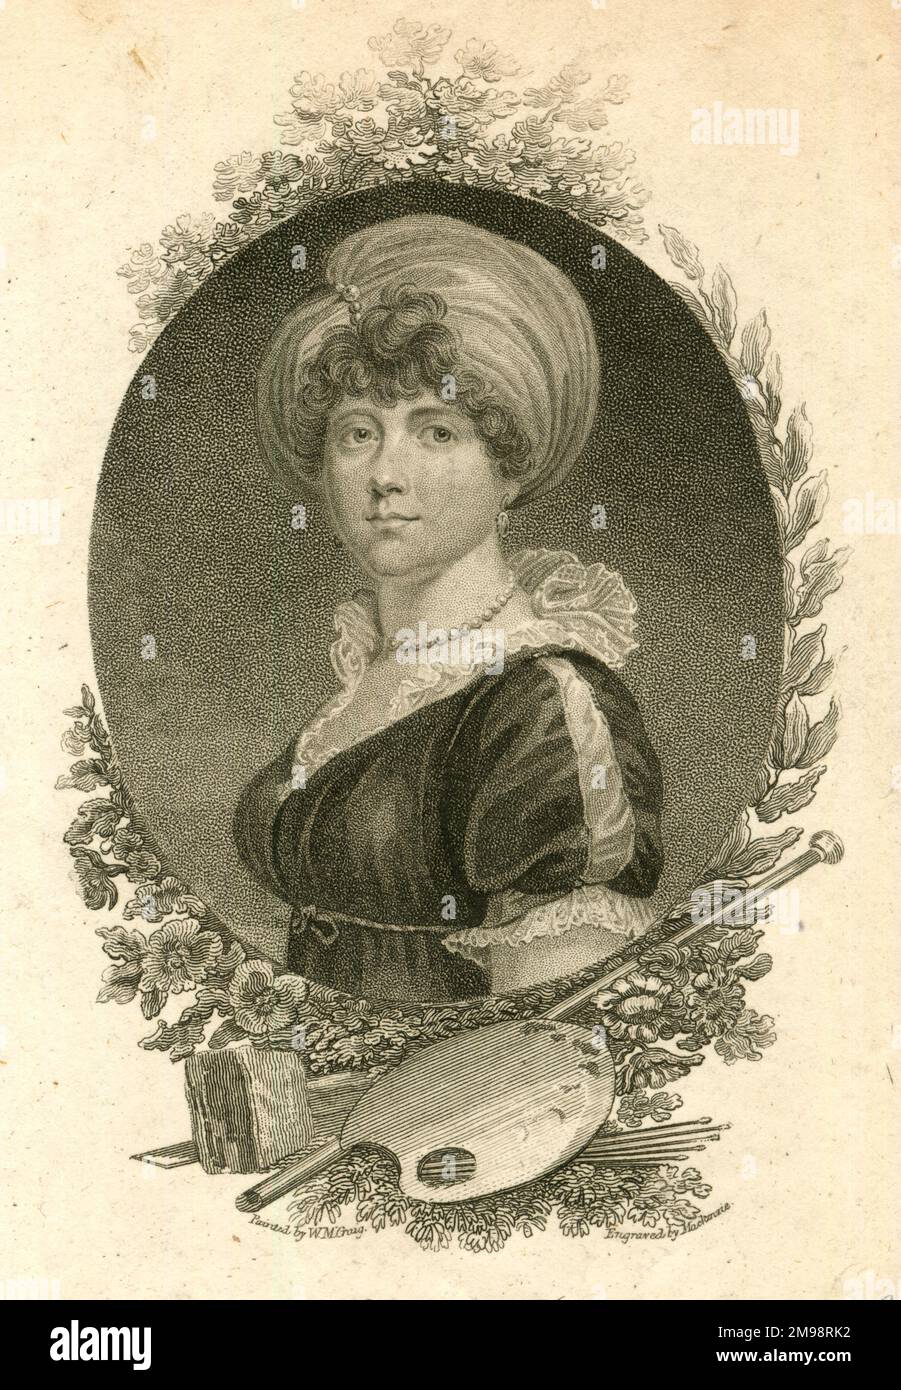 Princess Elizabeth of the United Kingdom (1770-1840), seventh child and third daughter of King George III. Stock Photo